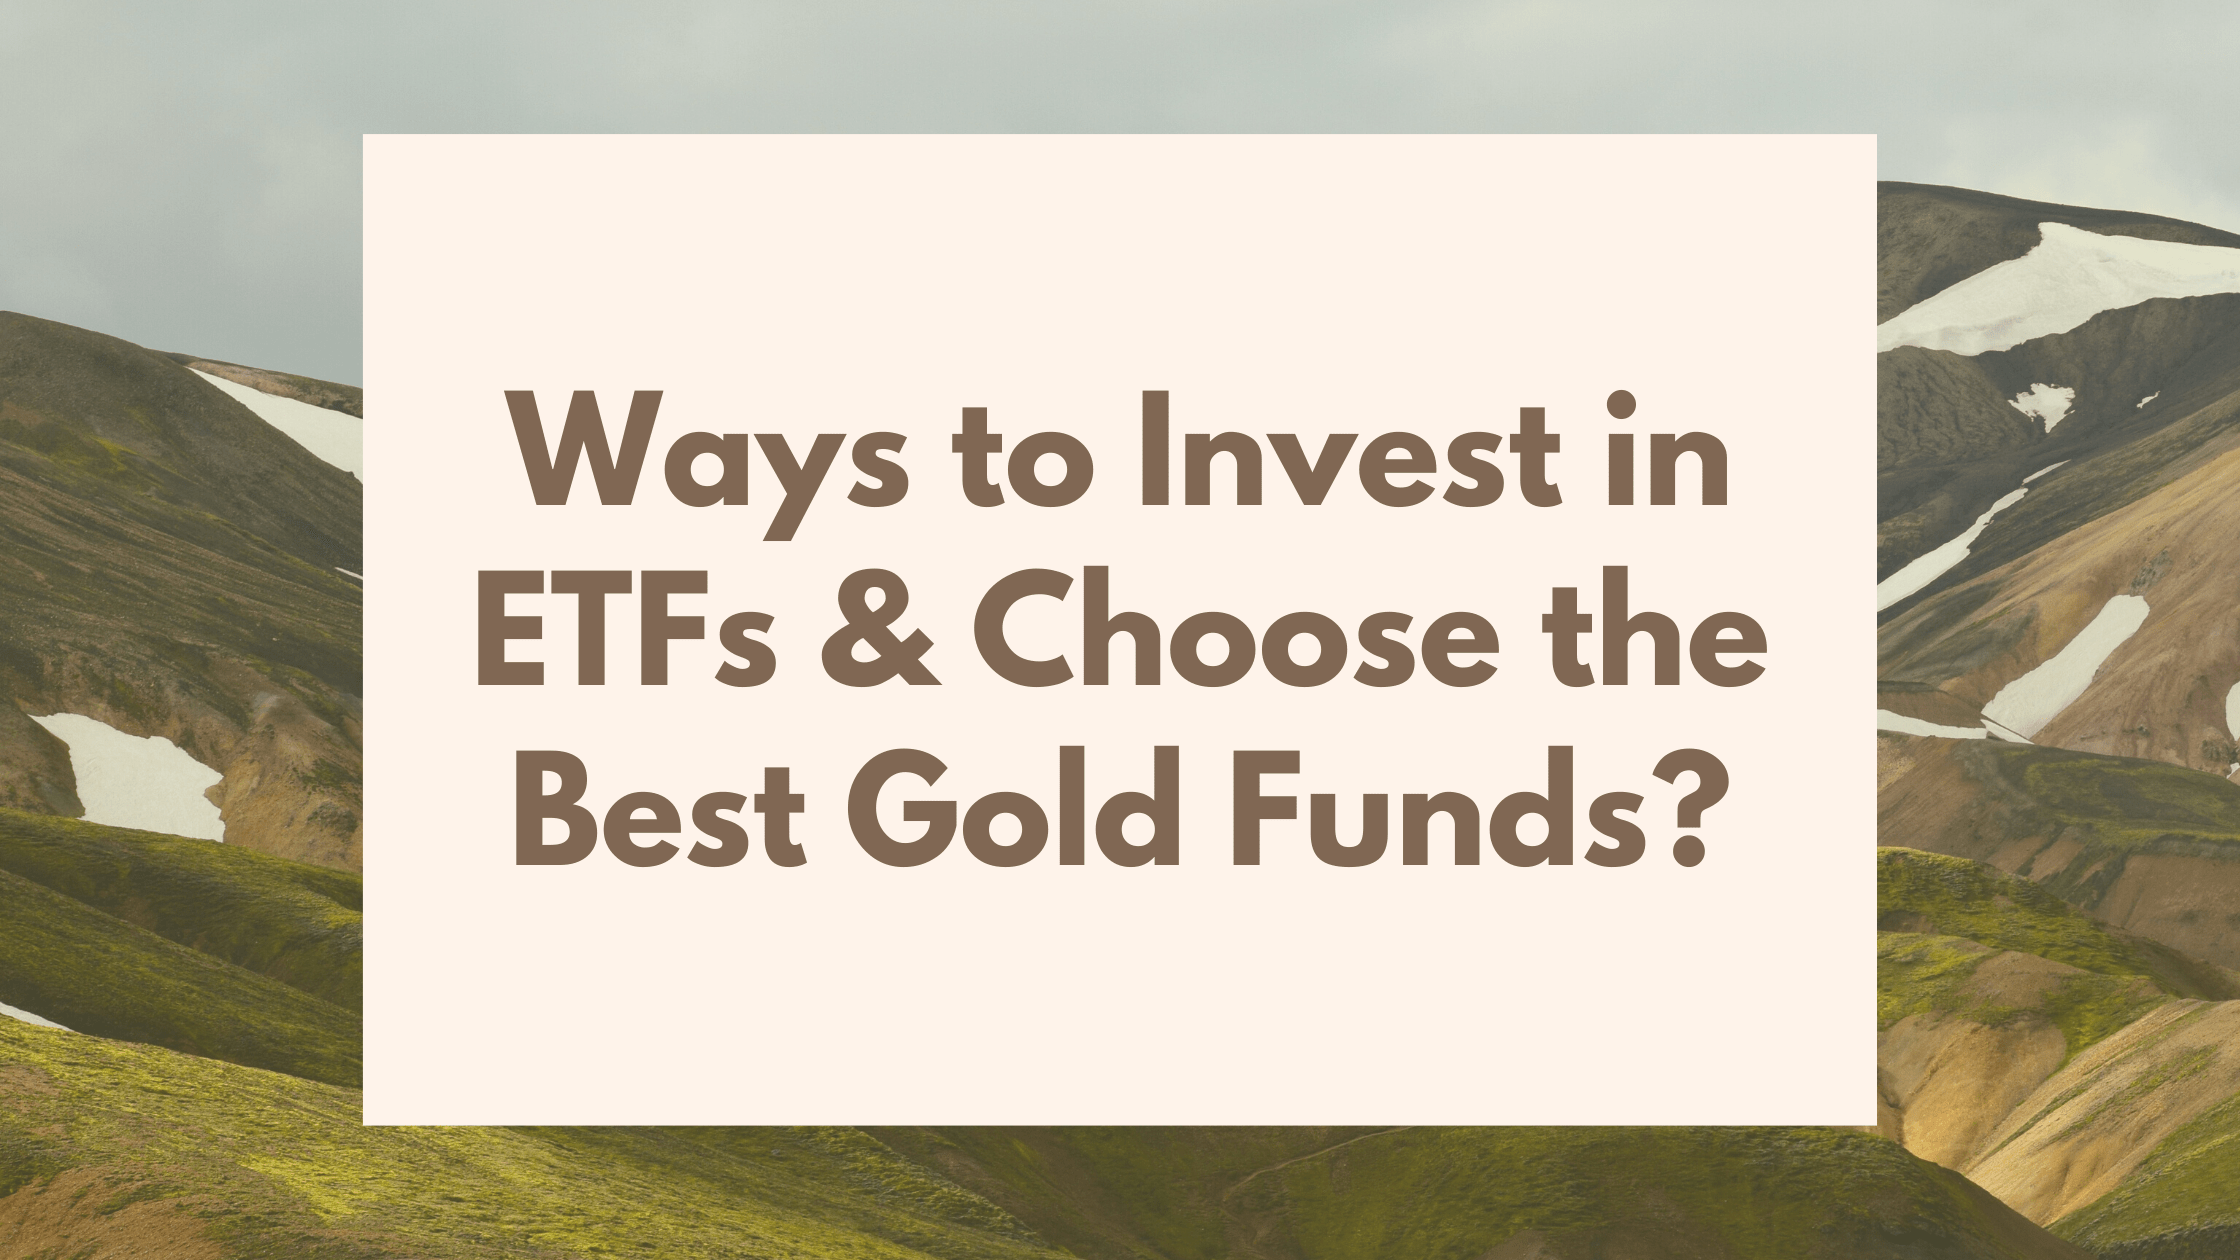 Choose the Best Gold Funds